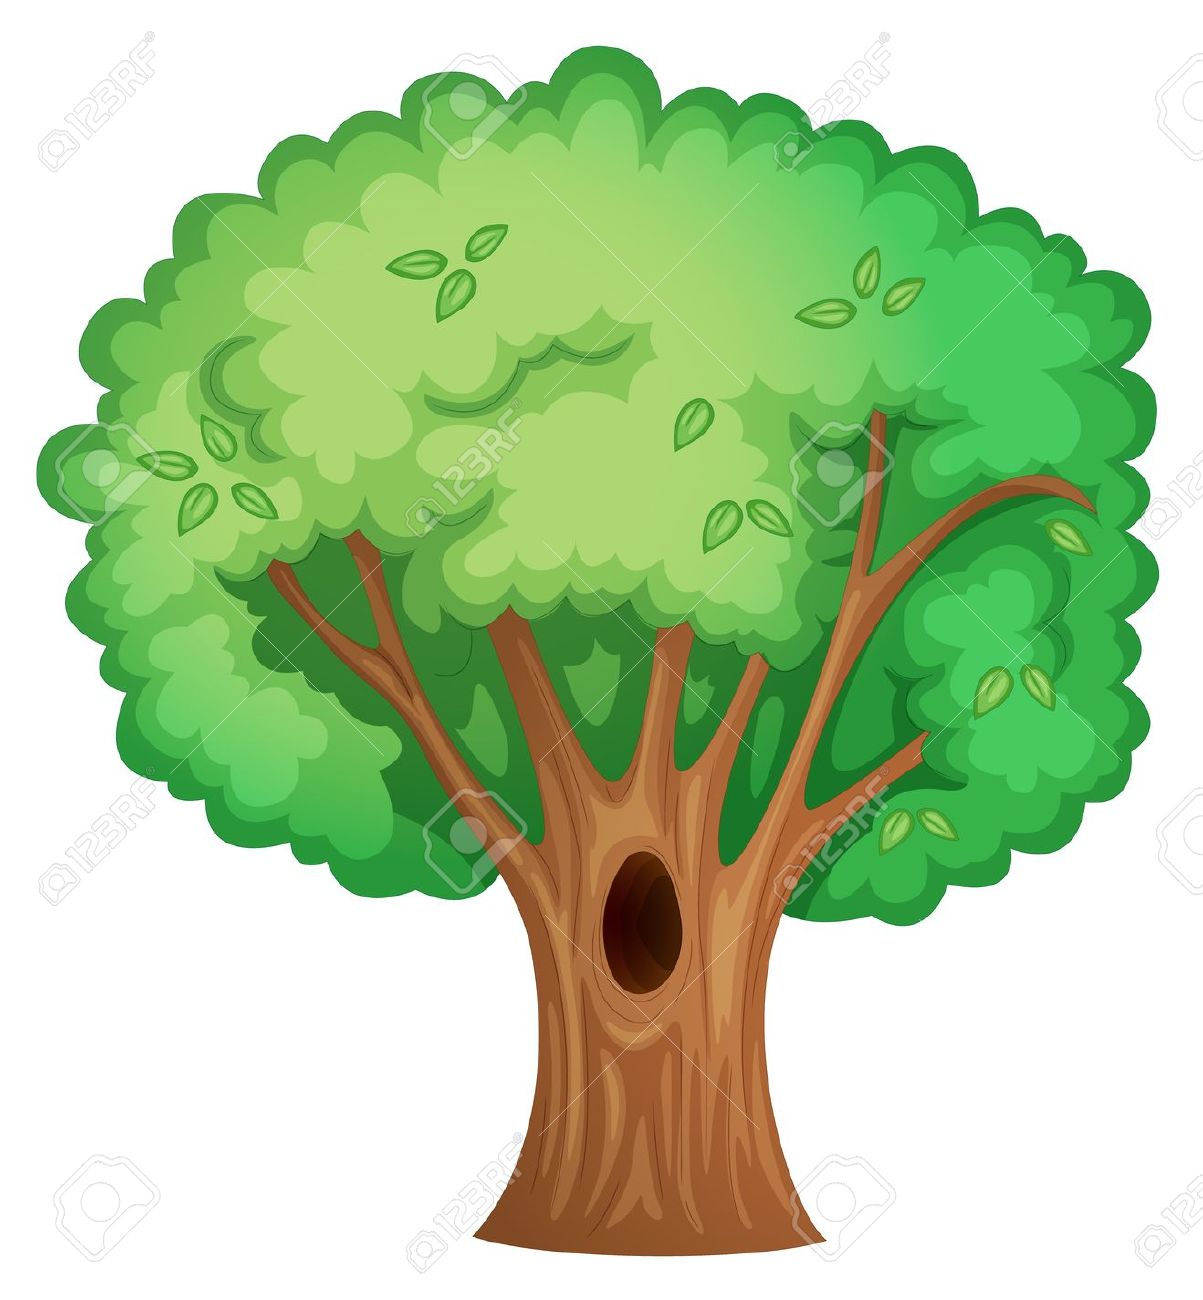 Hollow tree clipart free.